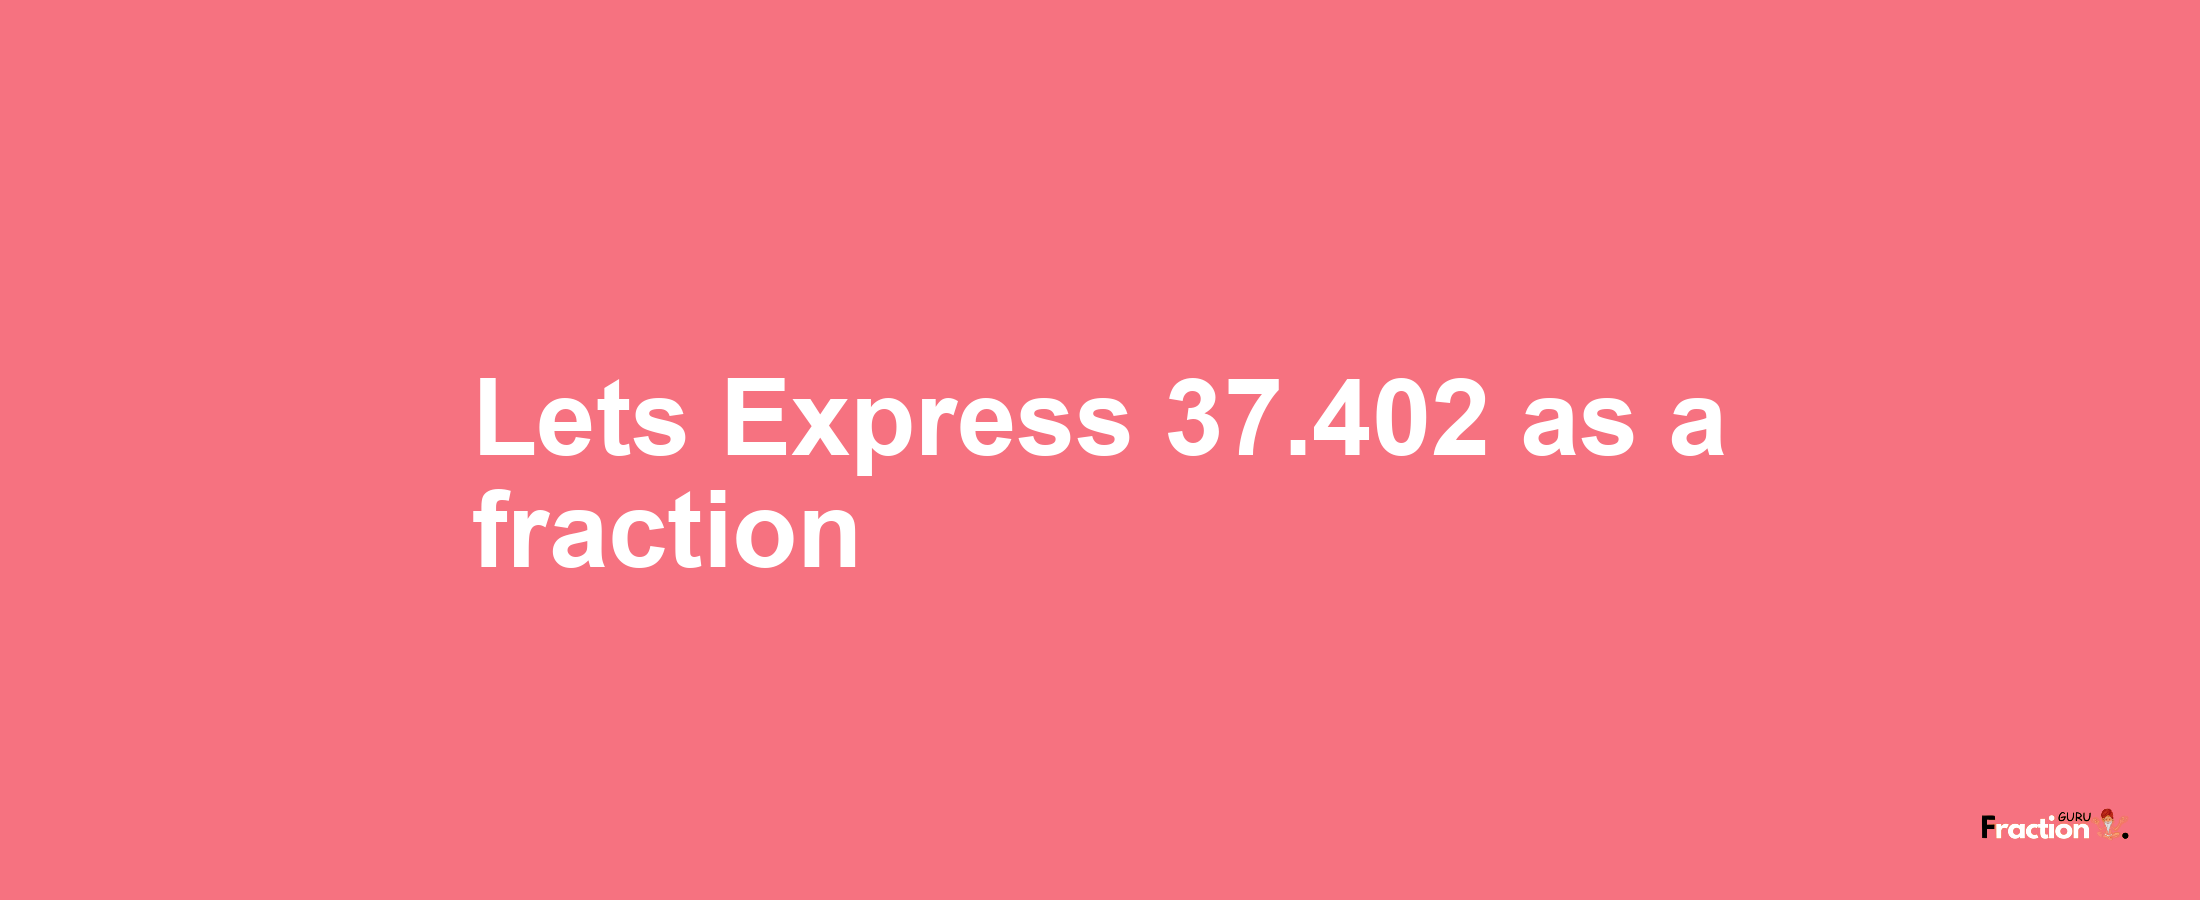 Lets Express 37.402 as afraction